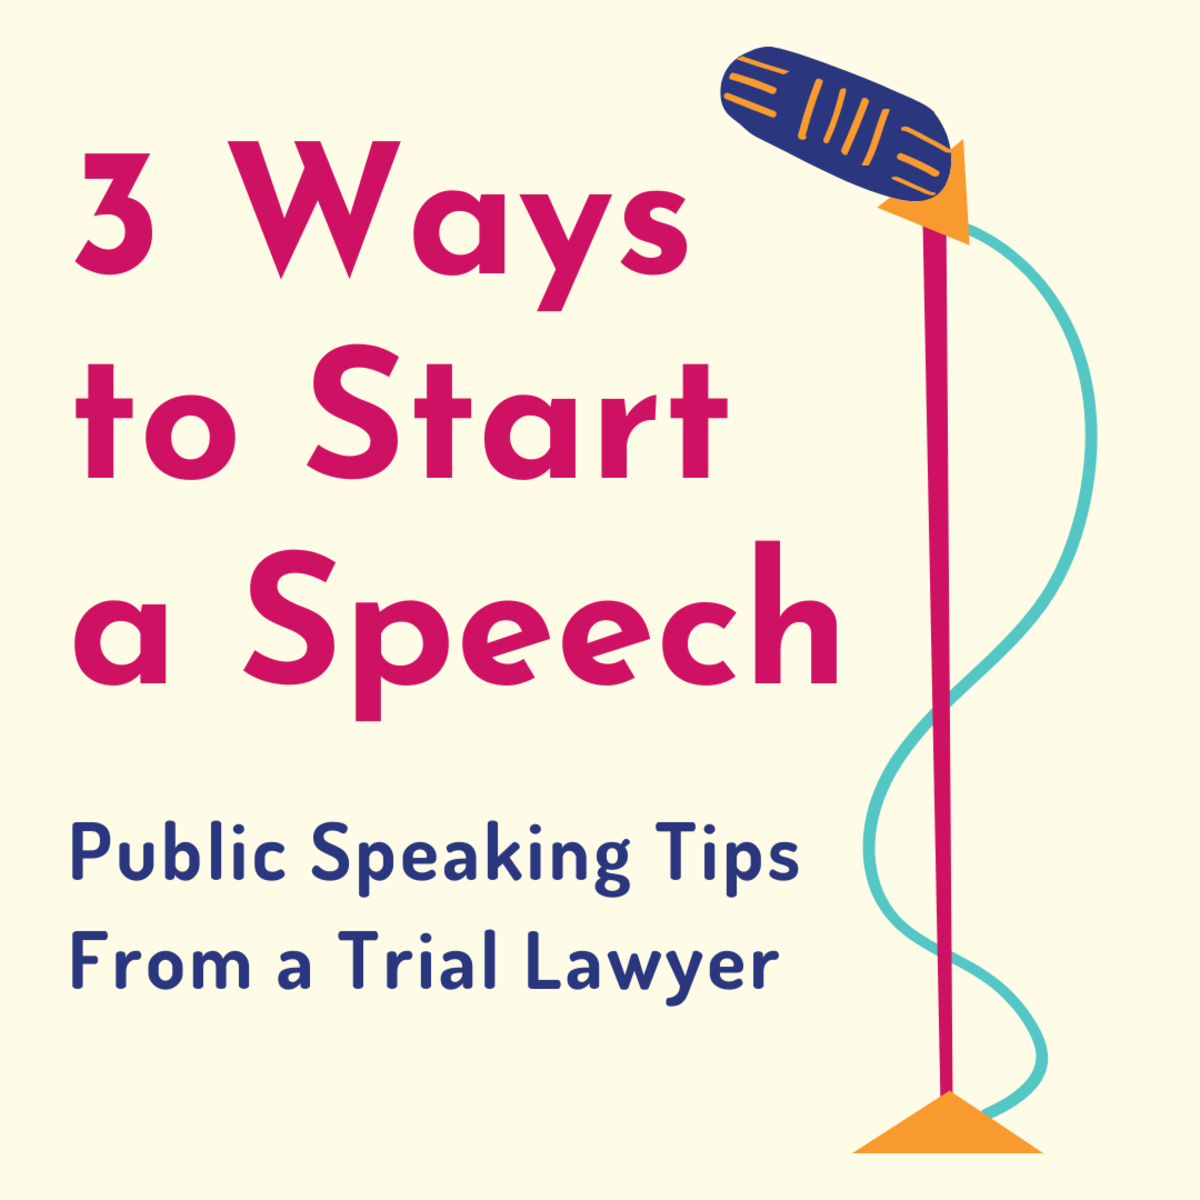 can you start your speech with a question